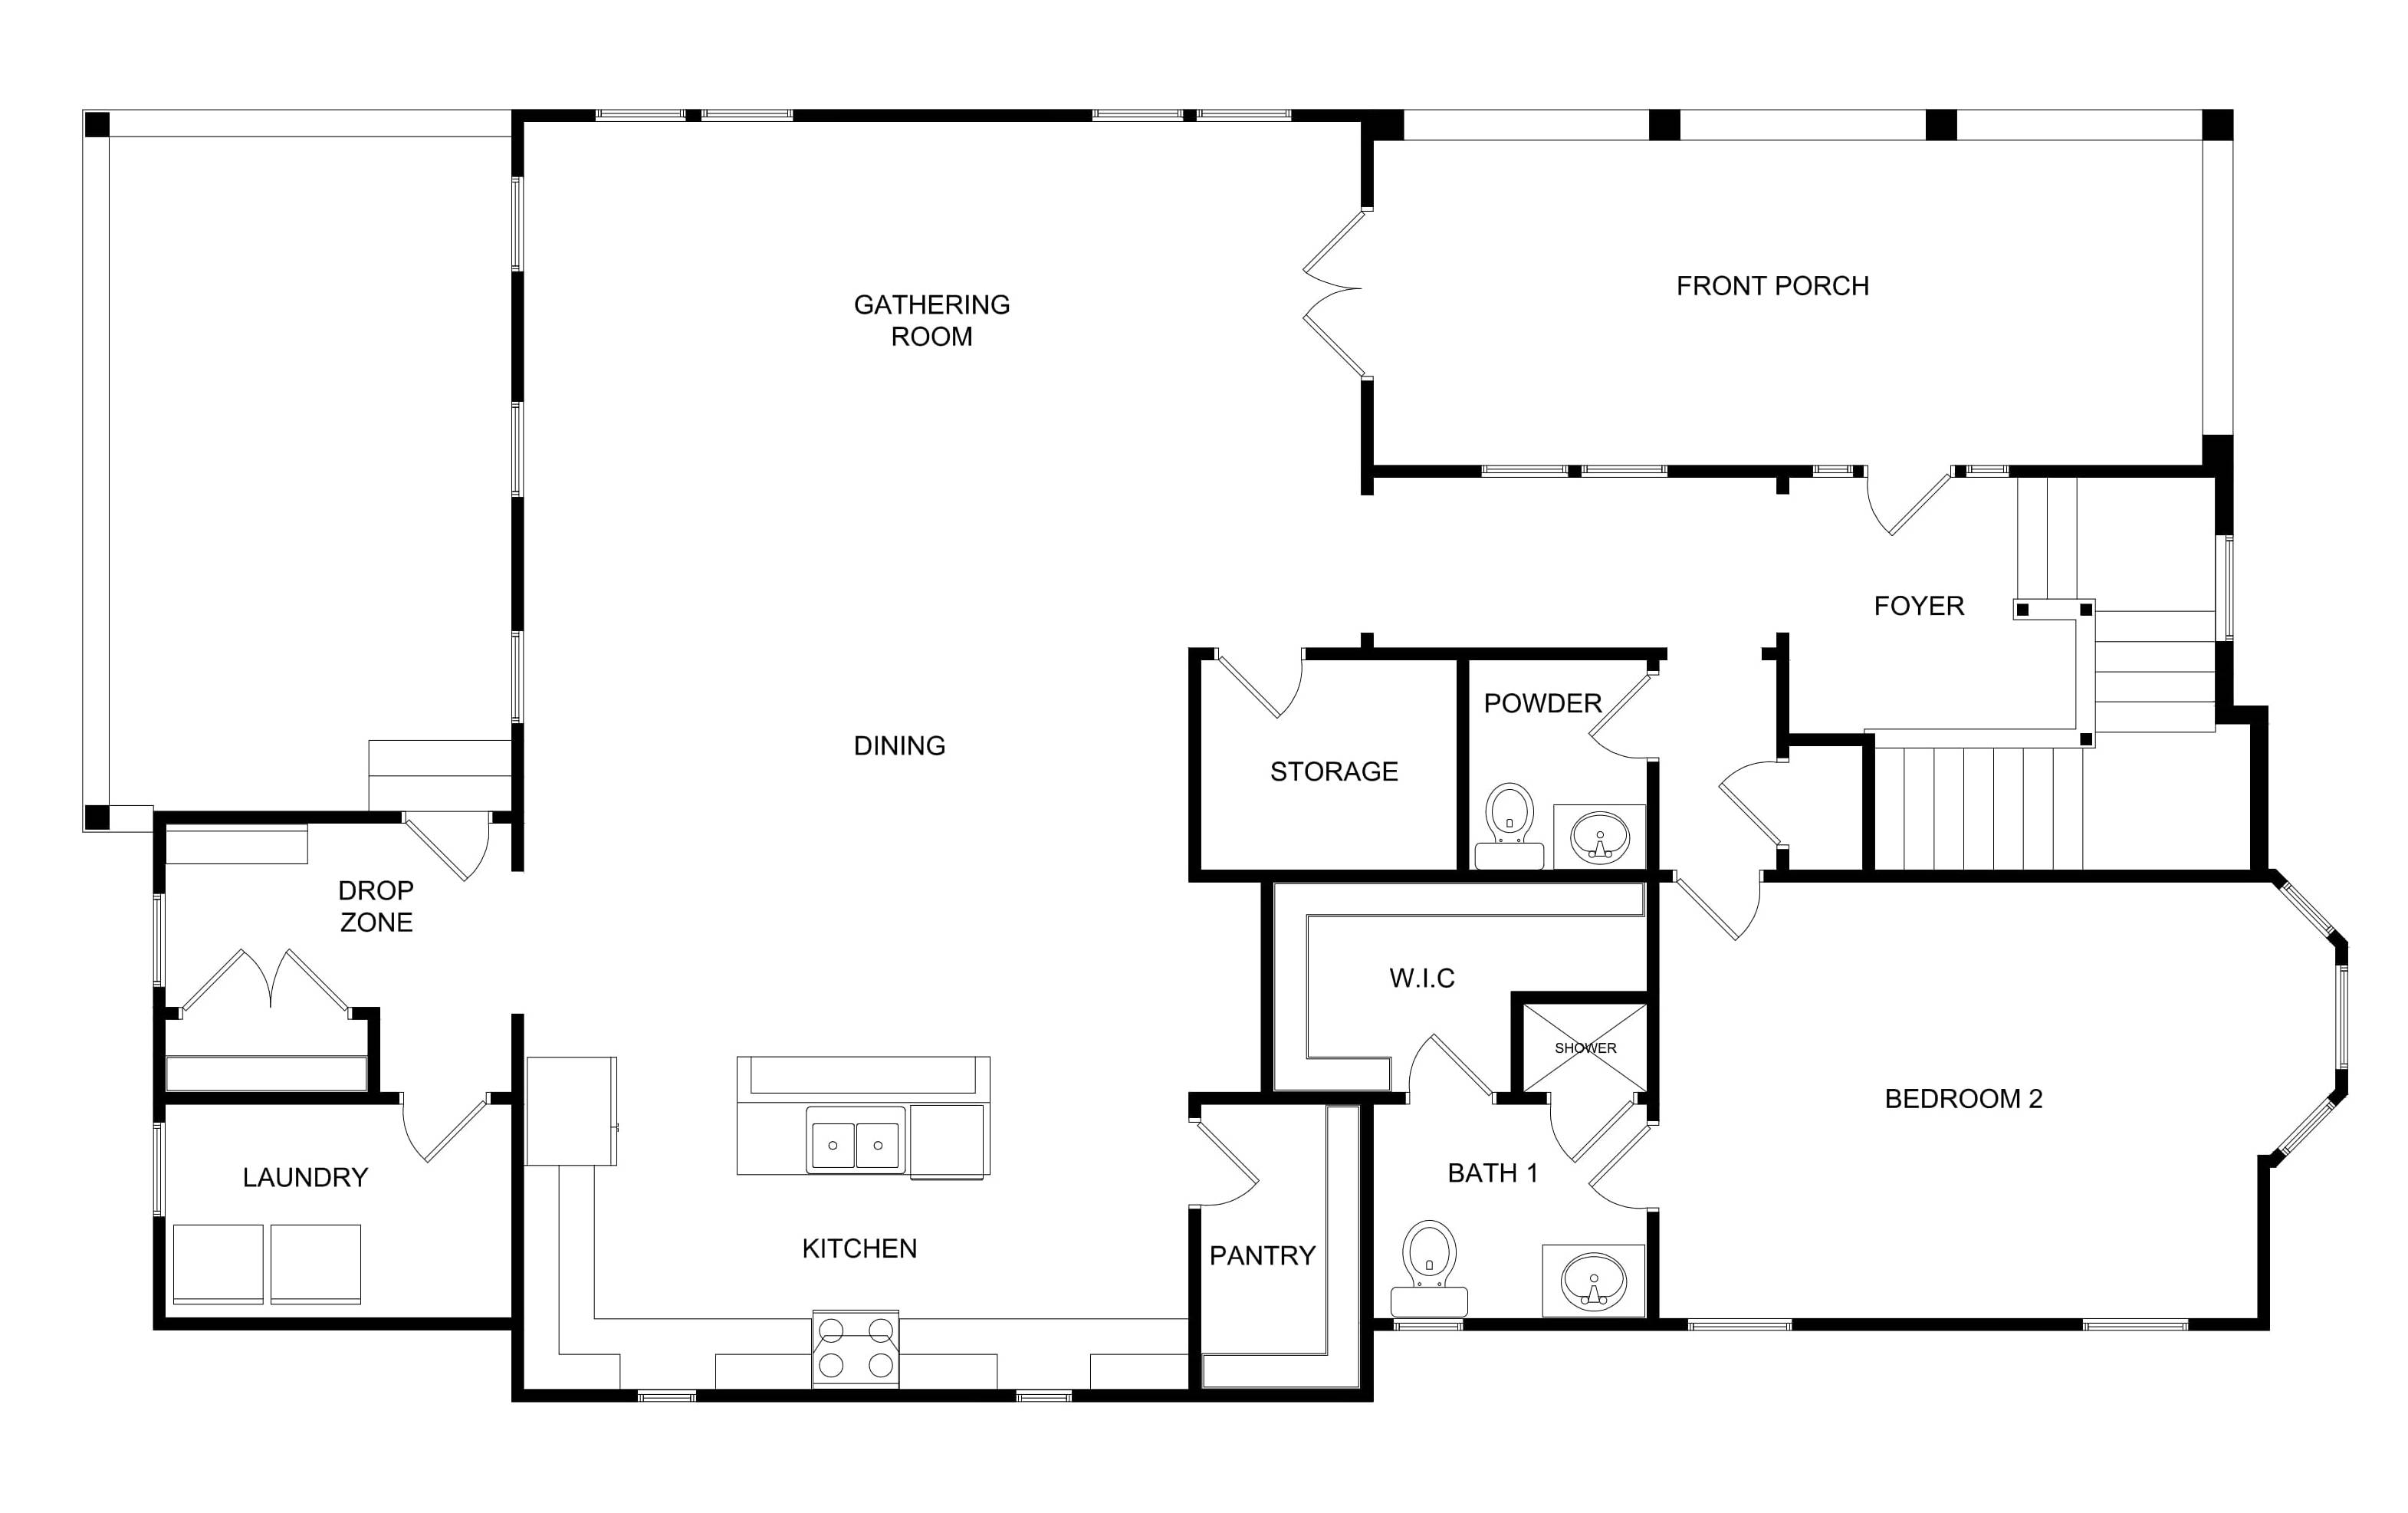 Why 2D Floor Plan Drawings Are Important For Building New Houses?